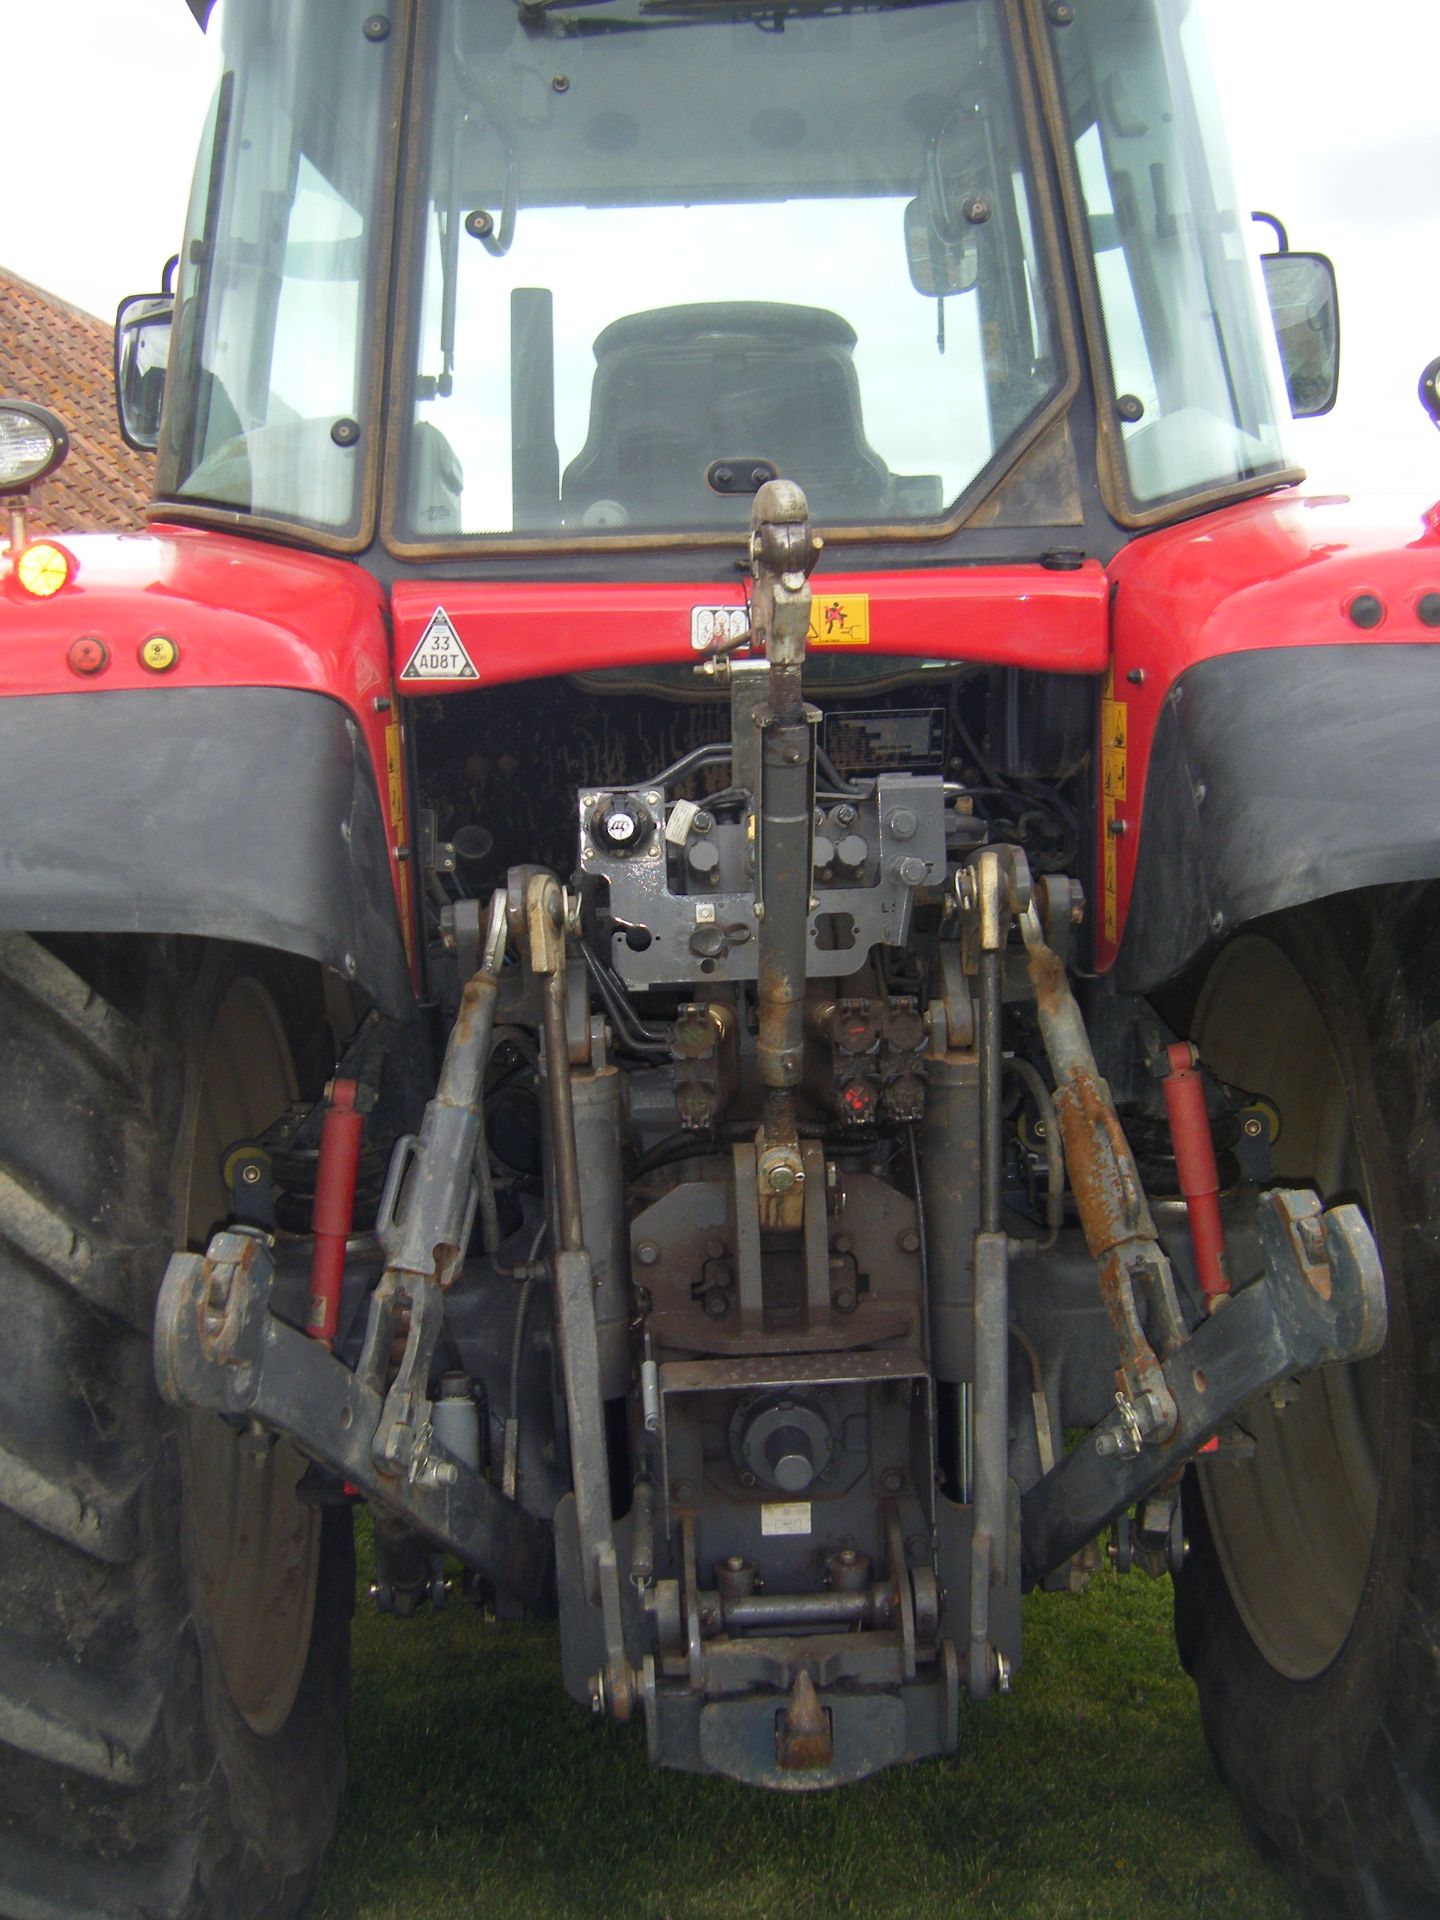 Massey Ferguson 6480 Dyna 6, 2011, 1,049 hrs - Location - Louth, - Image 3 of 6